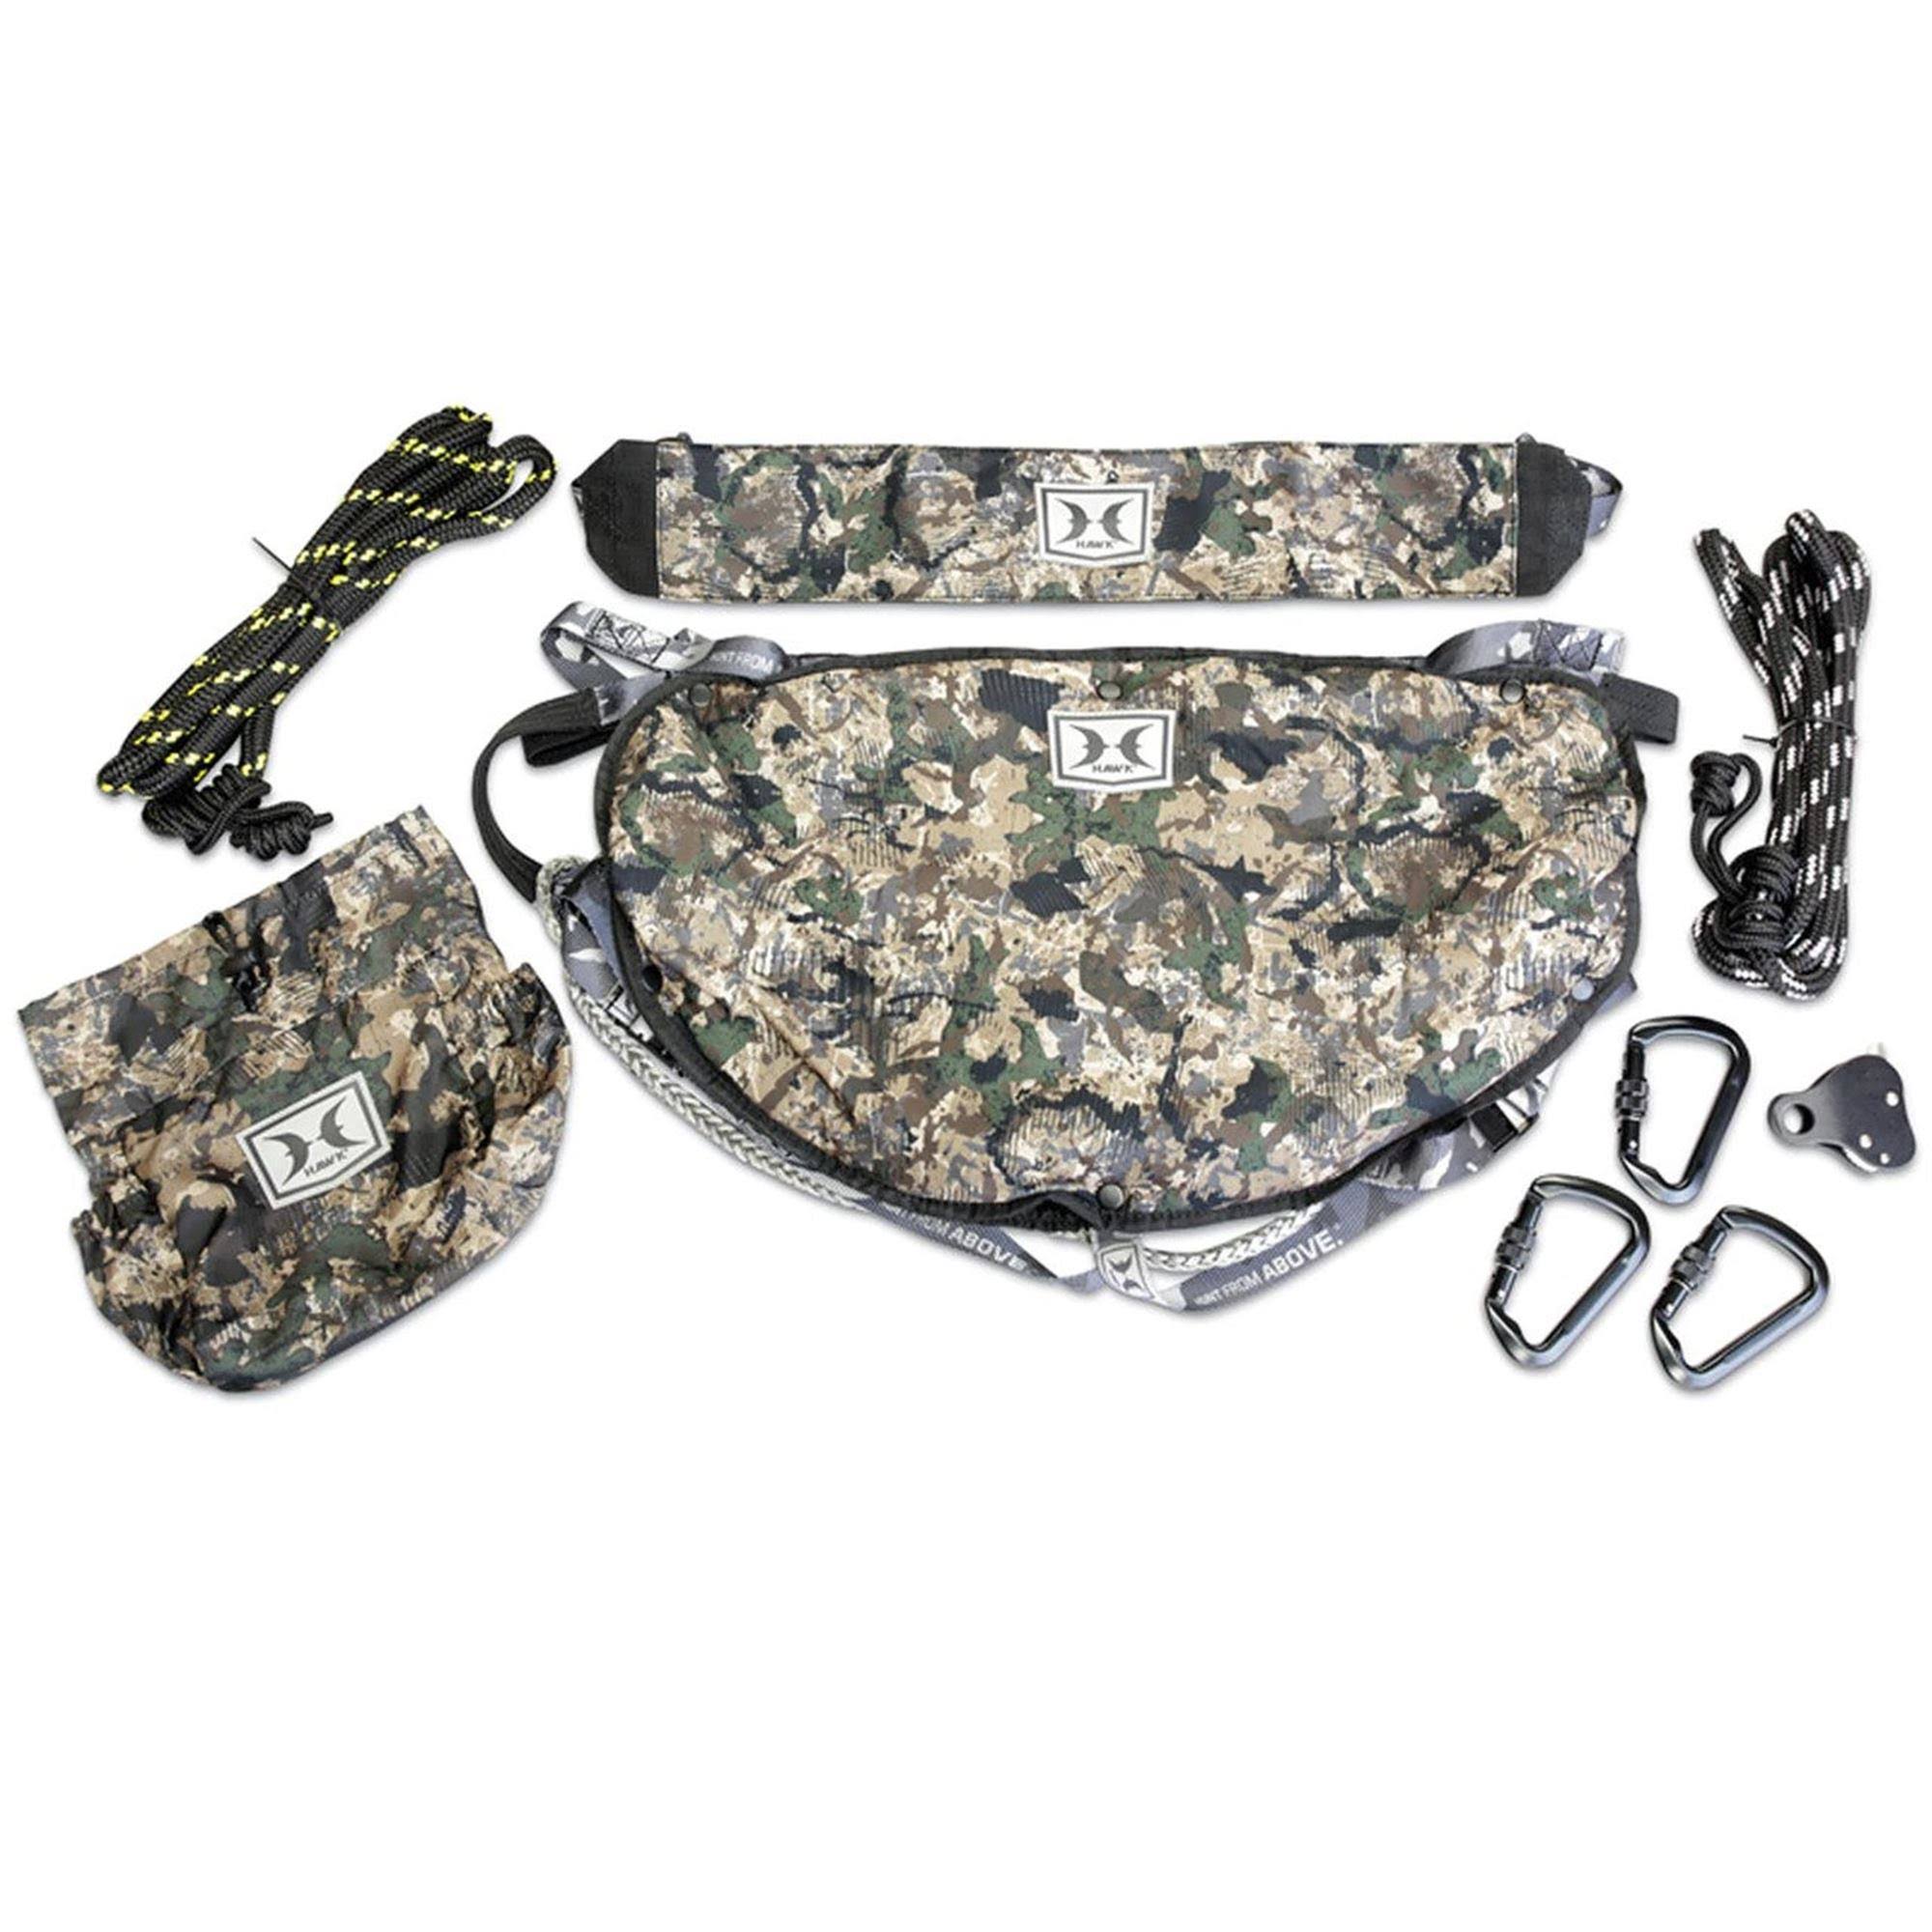 Hawk Helium Hammock Lightweight Packable Comfortable Camo Hunting Tree Saddle With Removable Padded Seat